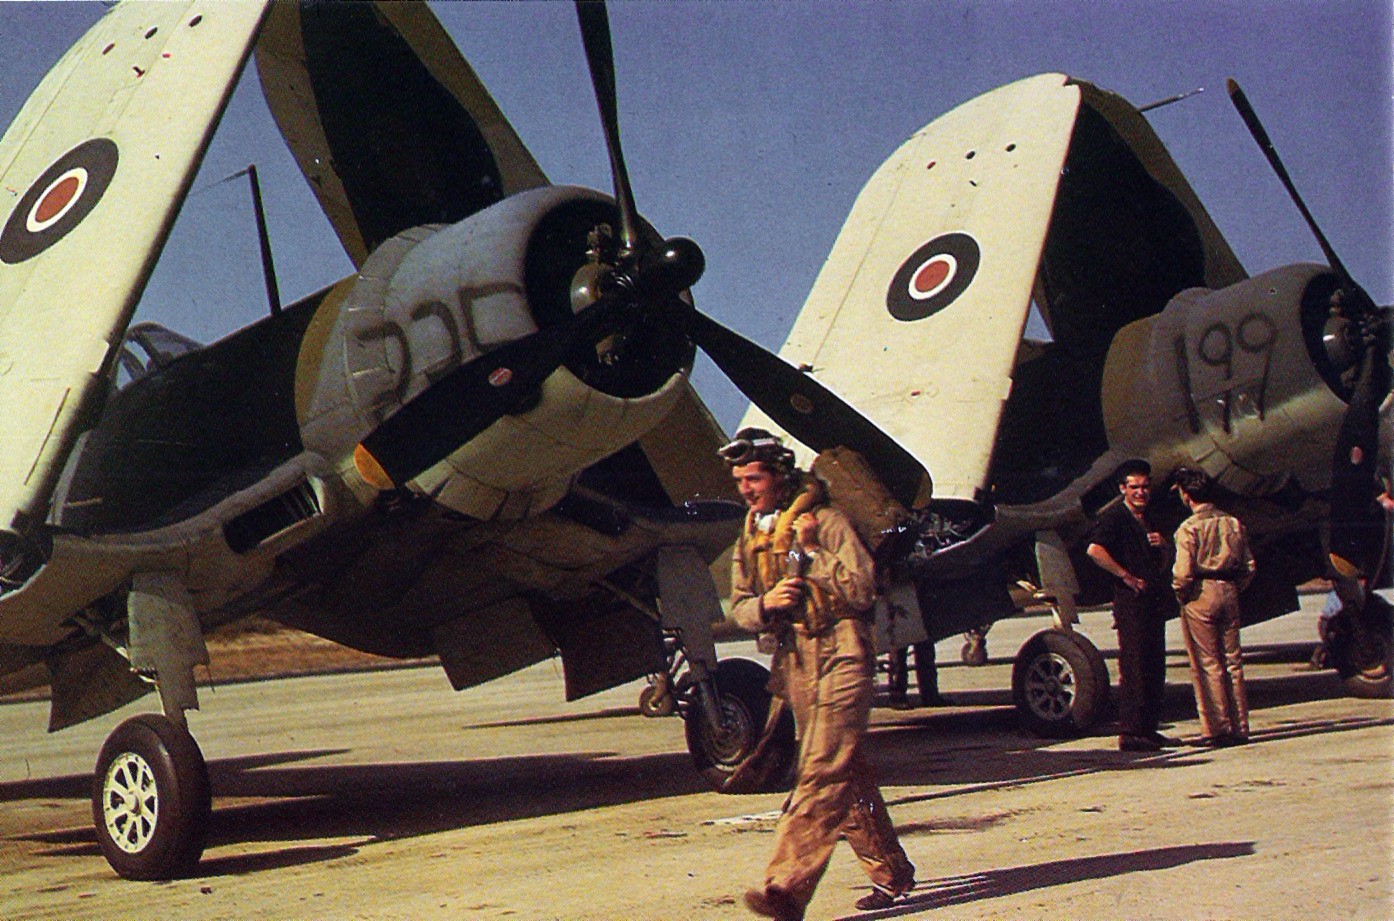 British Royal Navy Corsair Mk I fighters at Naval Air Station Quonset Point, Rhode Island, United States, 1943